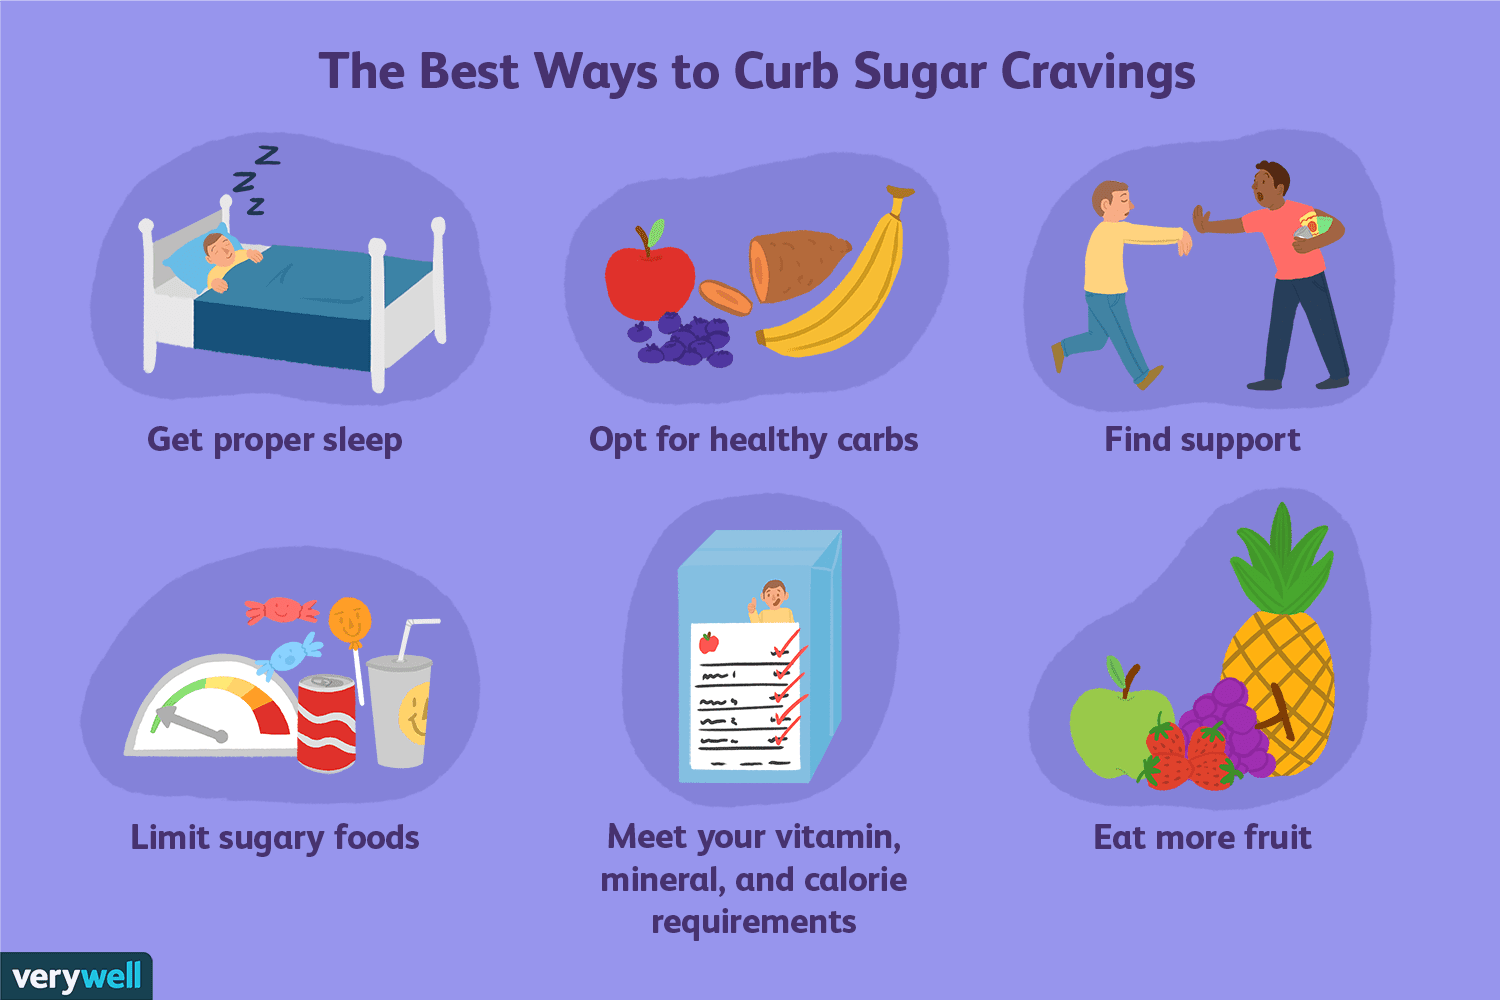 How Can Overcome Sugar Cravings for Better Health?